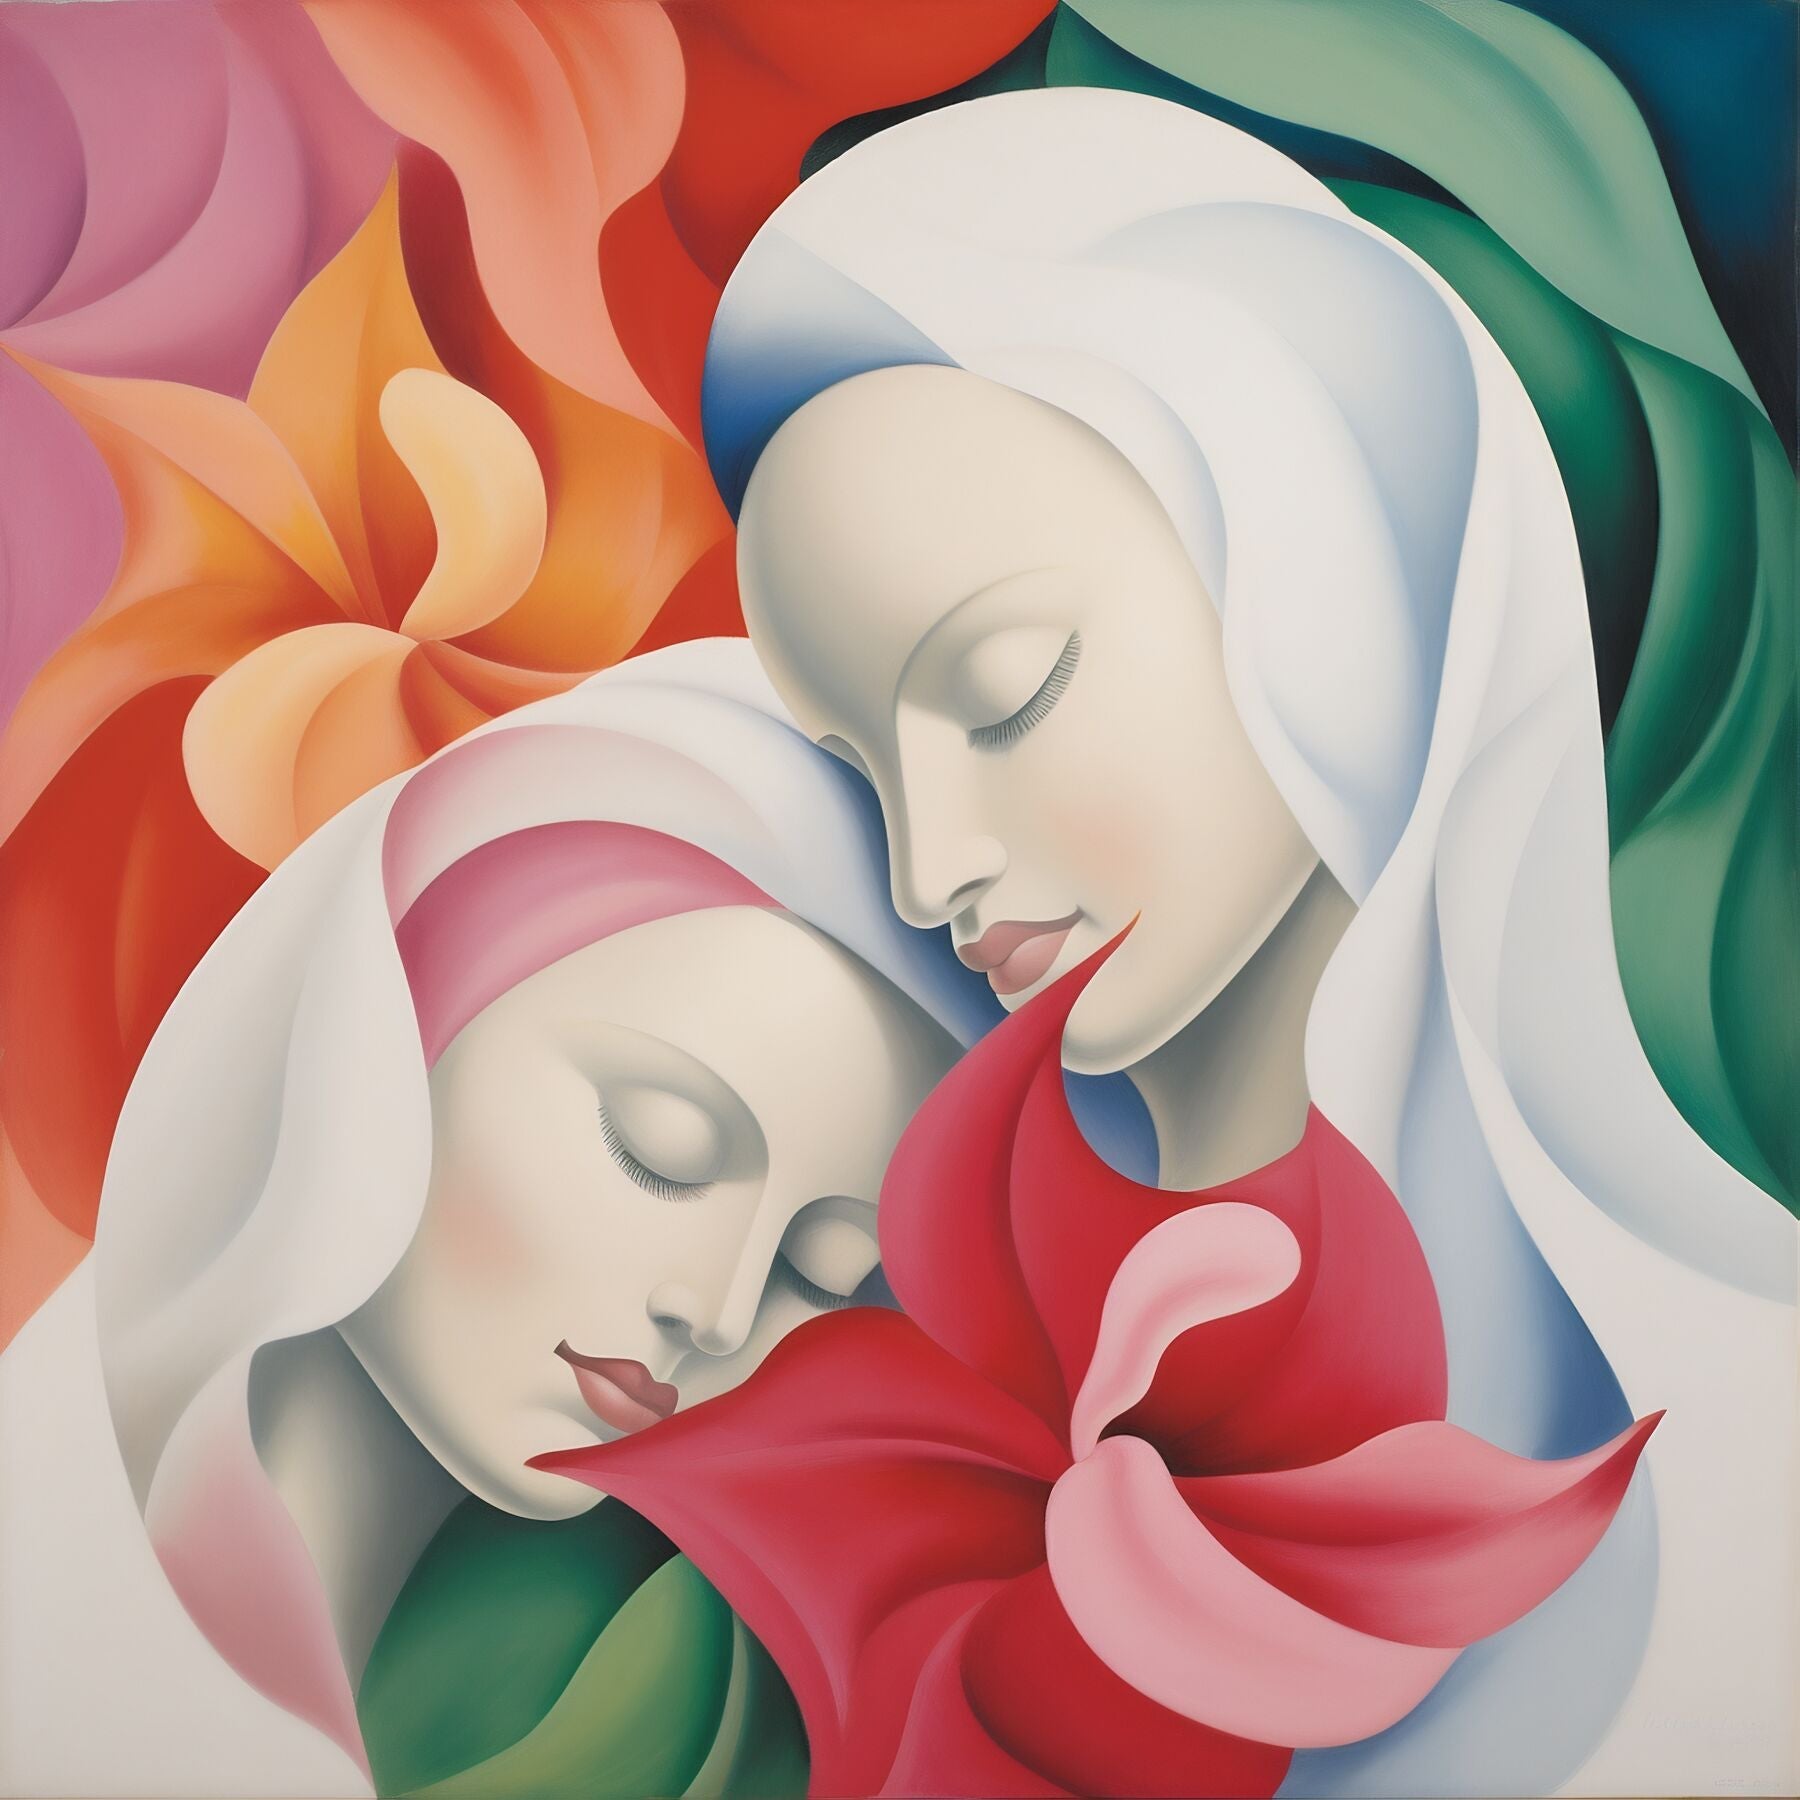 Painting inspired by georgia okeeffe flower women white